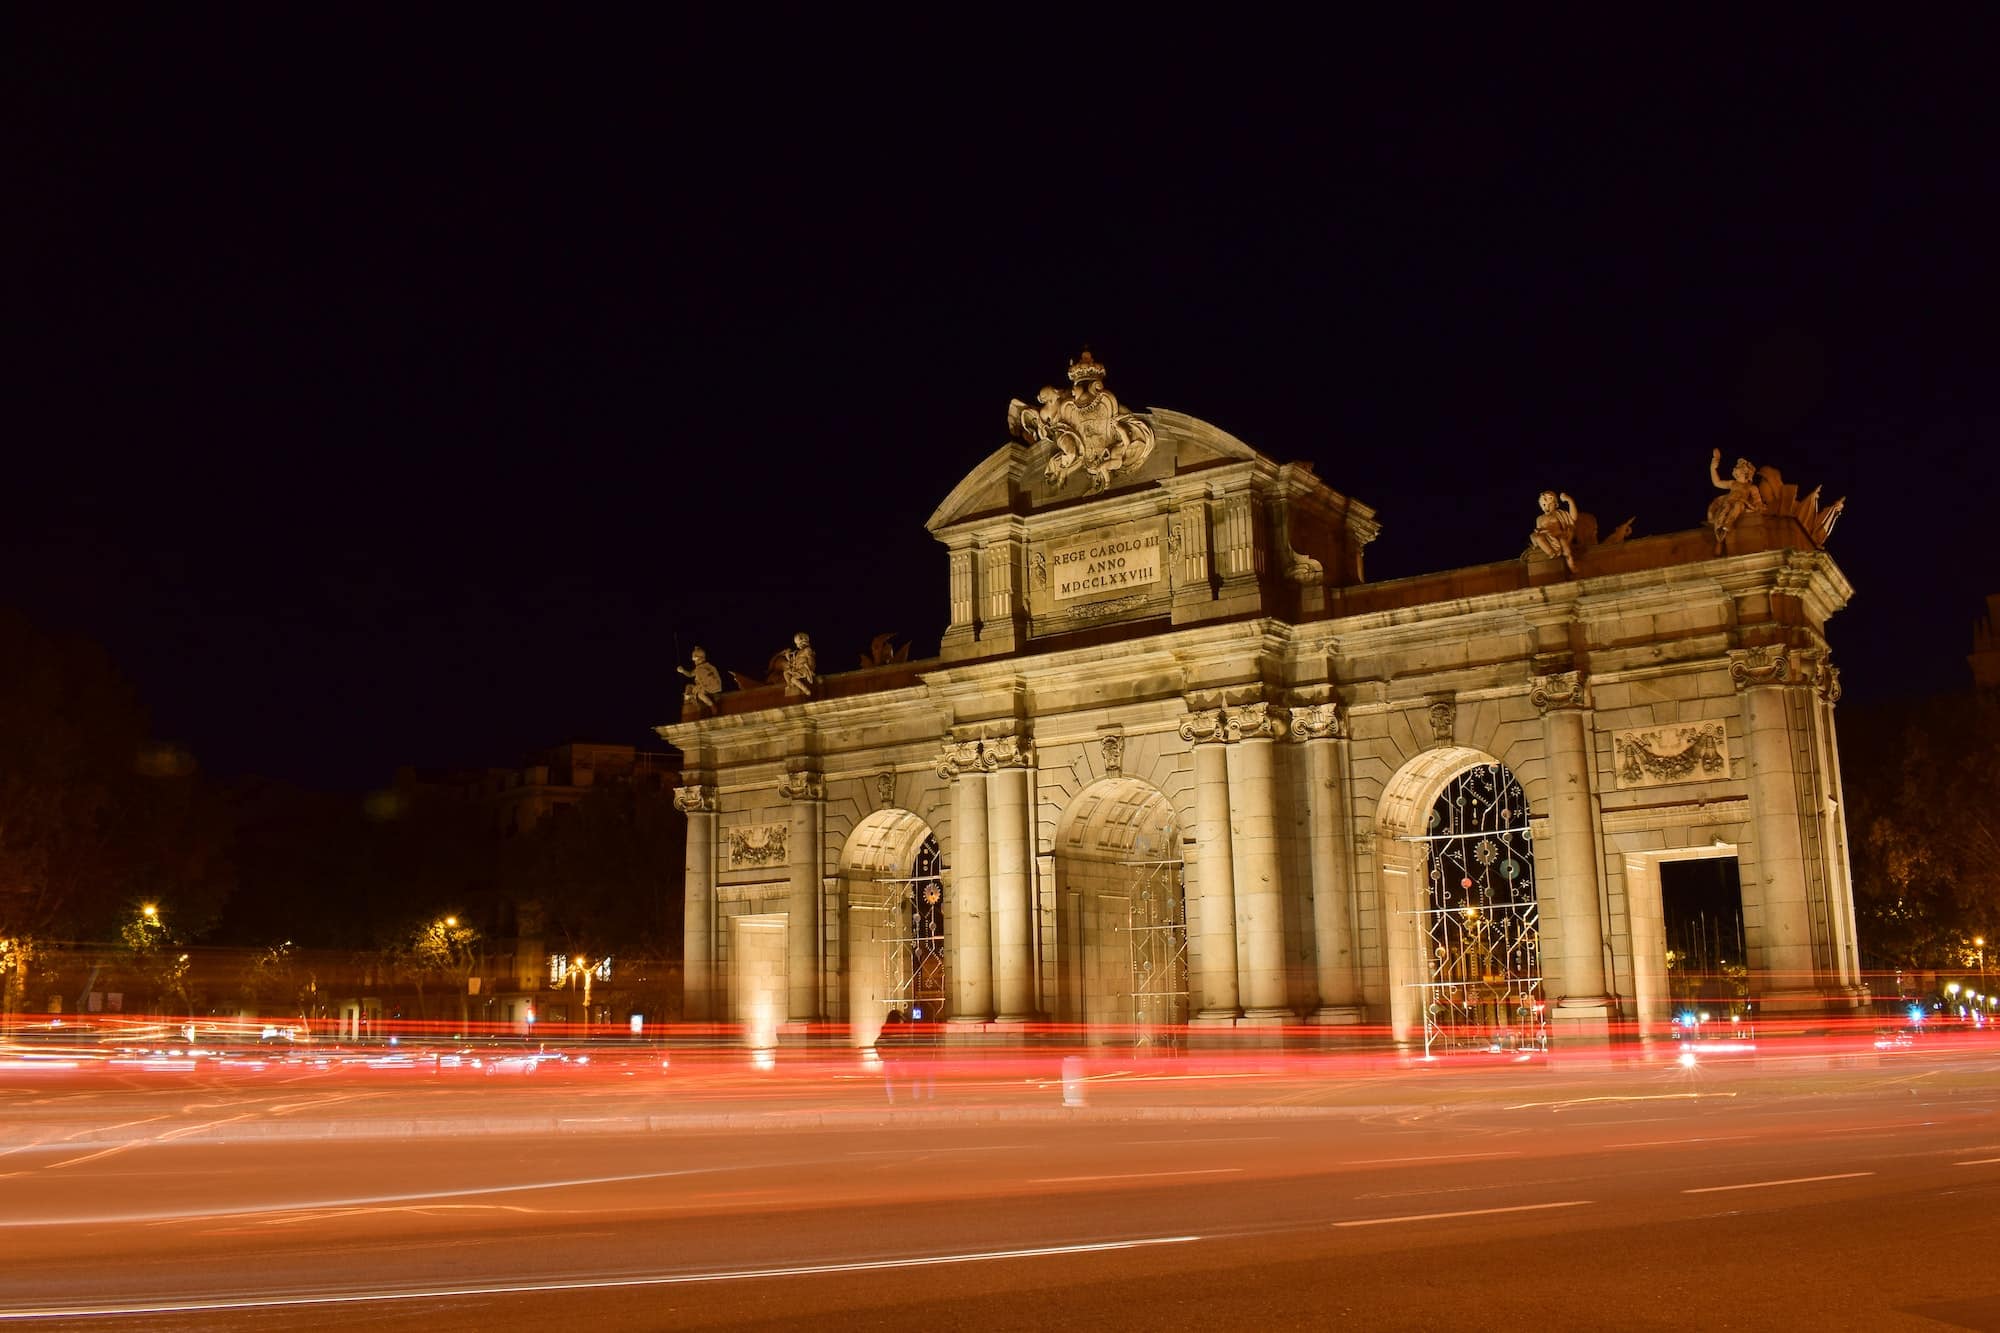 The Puerta de Alcala in Madrid at night. With flashes and lights of cars passing by.